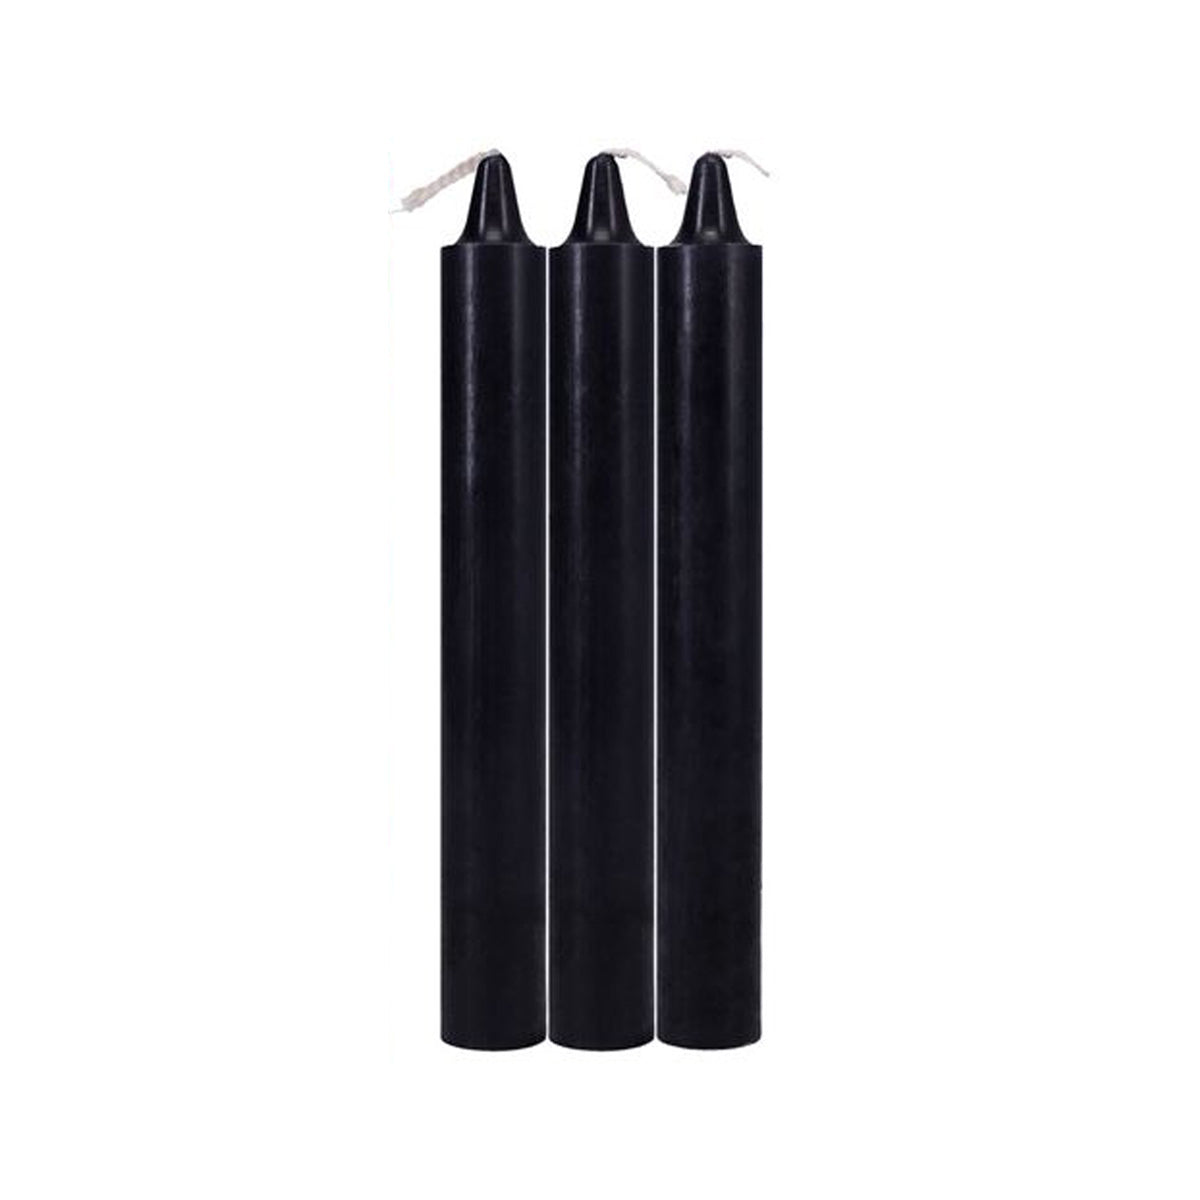 Pack of three black candles for wax BSDM play Nudie Co